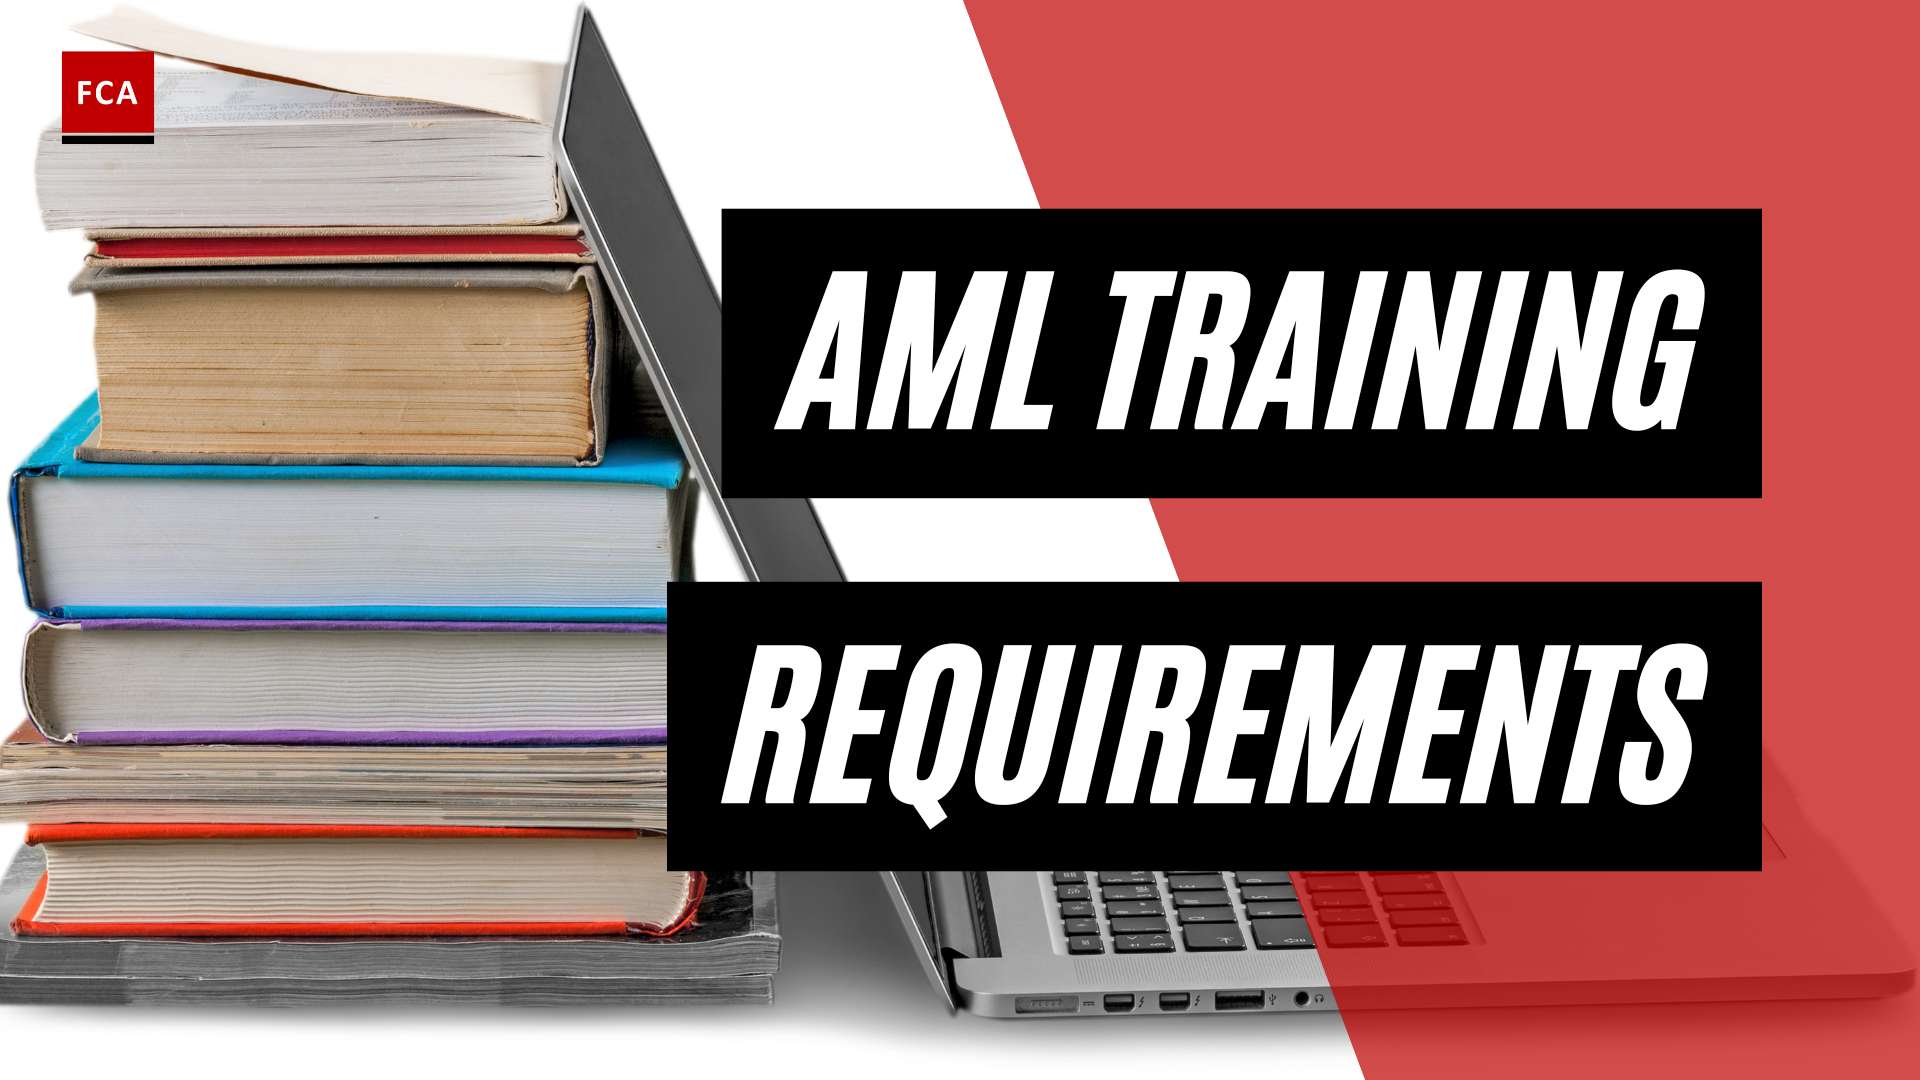 Cracking The Code: Aml Training Requirements Demystified